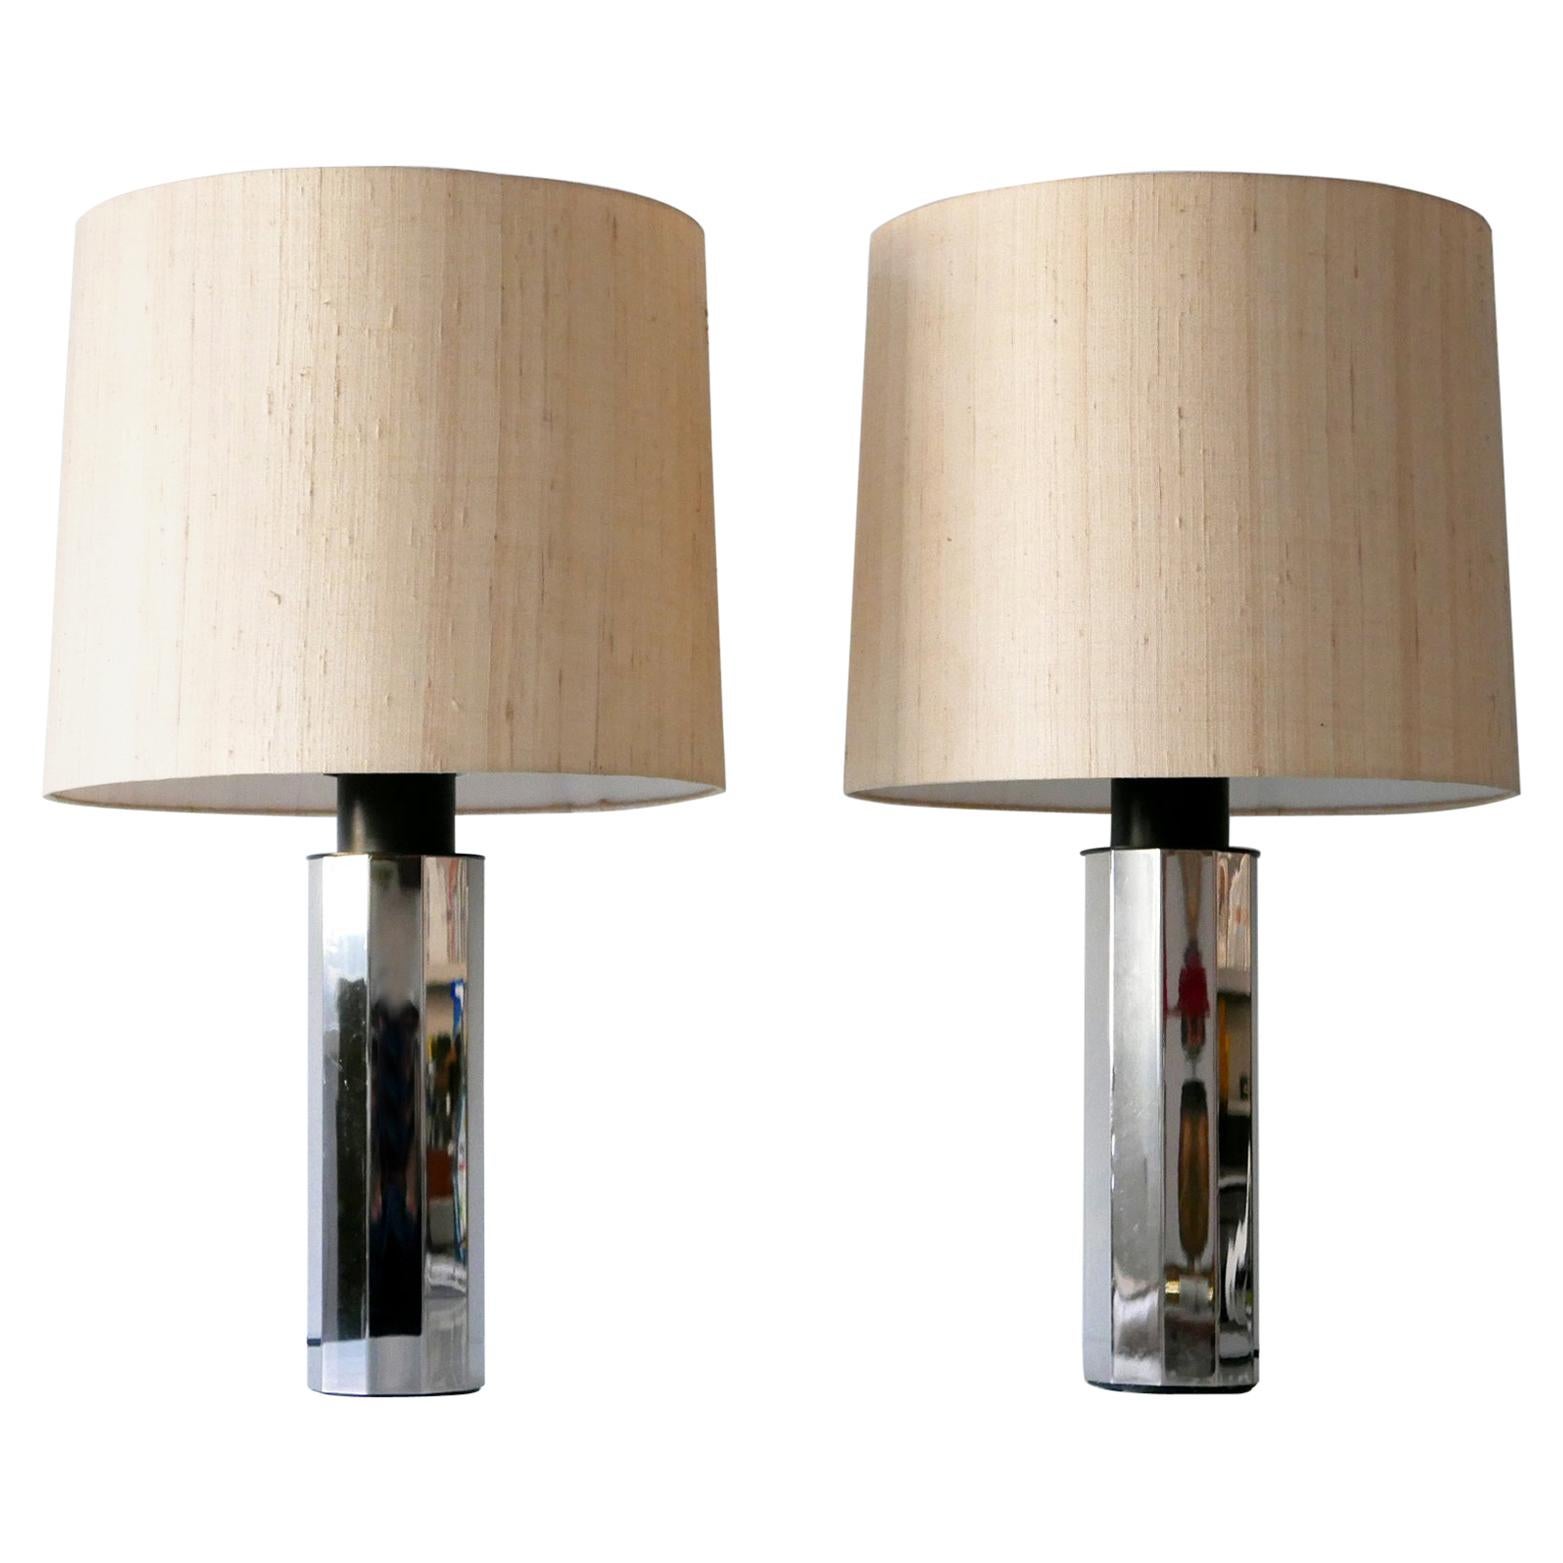 Set of Two Huge, 5-Flamed Midcentury Decagonal Chrome Table Lamps 1960s, Germany For Sale